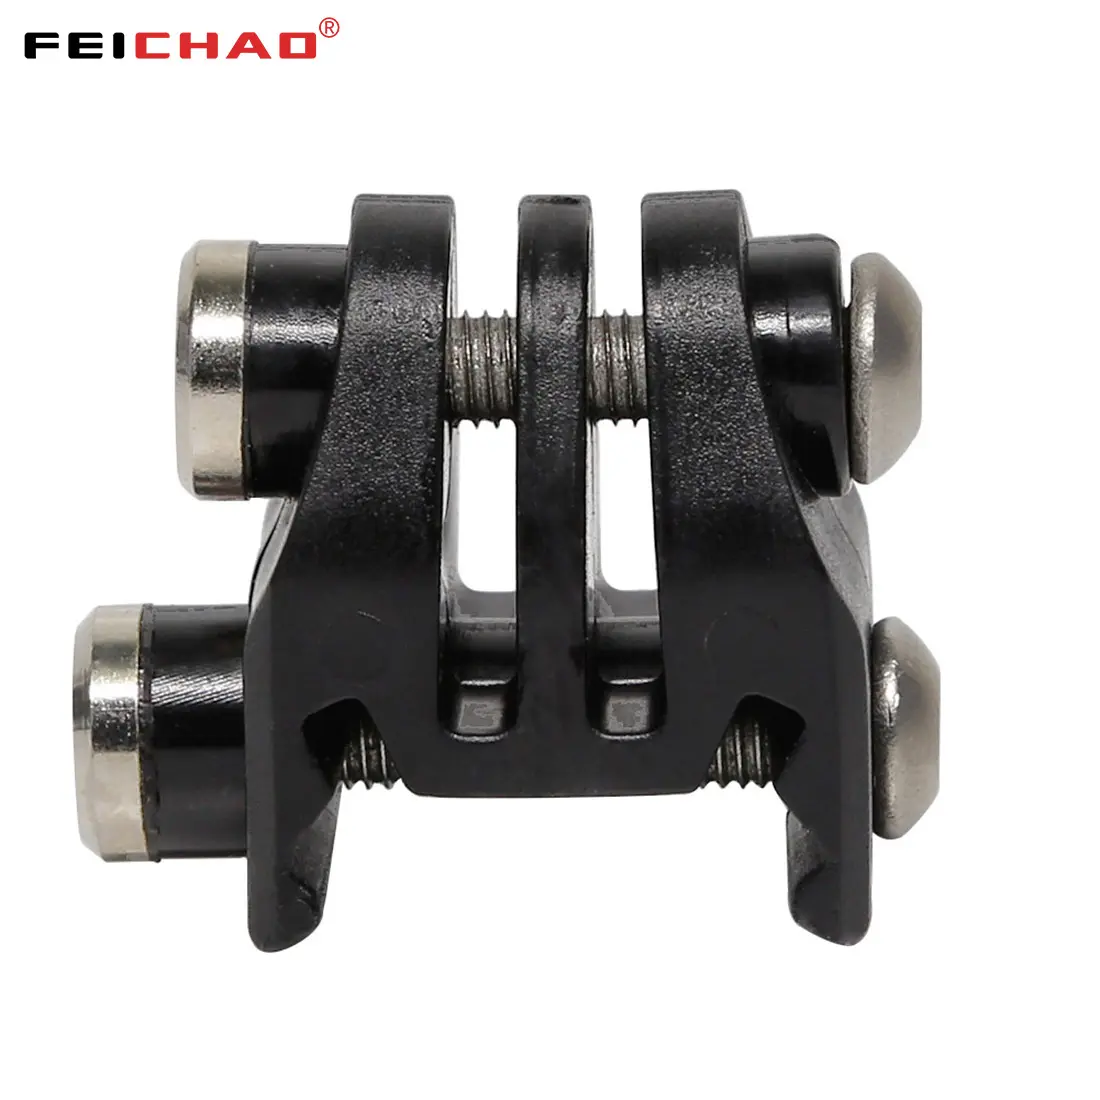 FEICHAO Action Camera Accessories Mini Rail Mount Adapter For GOPRO/EKEN/Action Camera